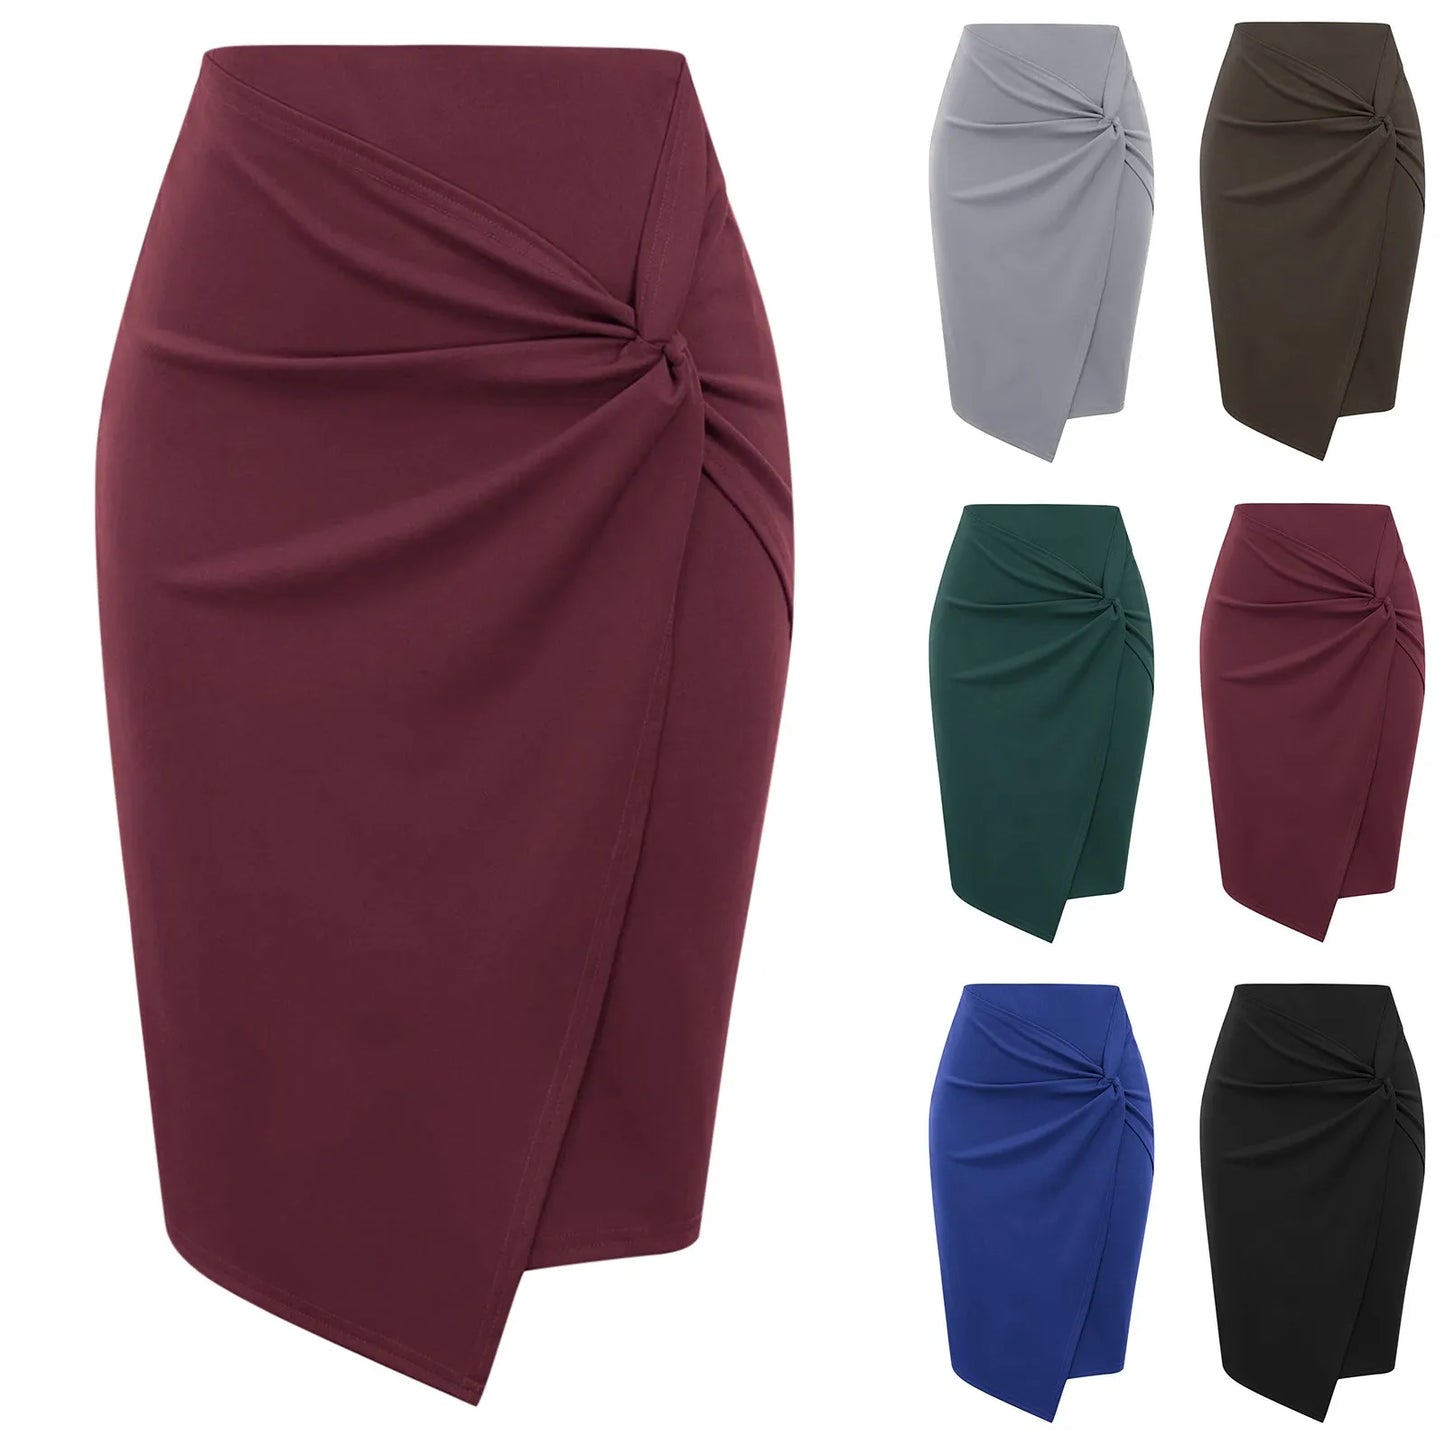 New Skirts Sexy Women Solid Color Skirts High Waist Female Fashion Bodycon Irregular Office Lady Party Clubwear Skirts 2024